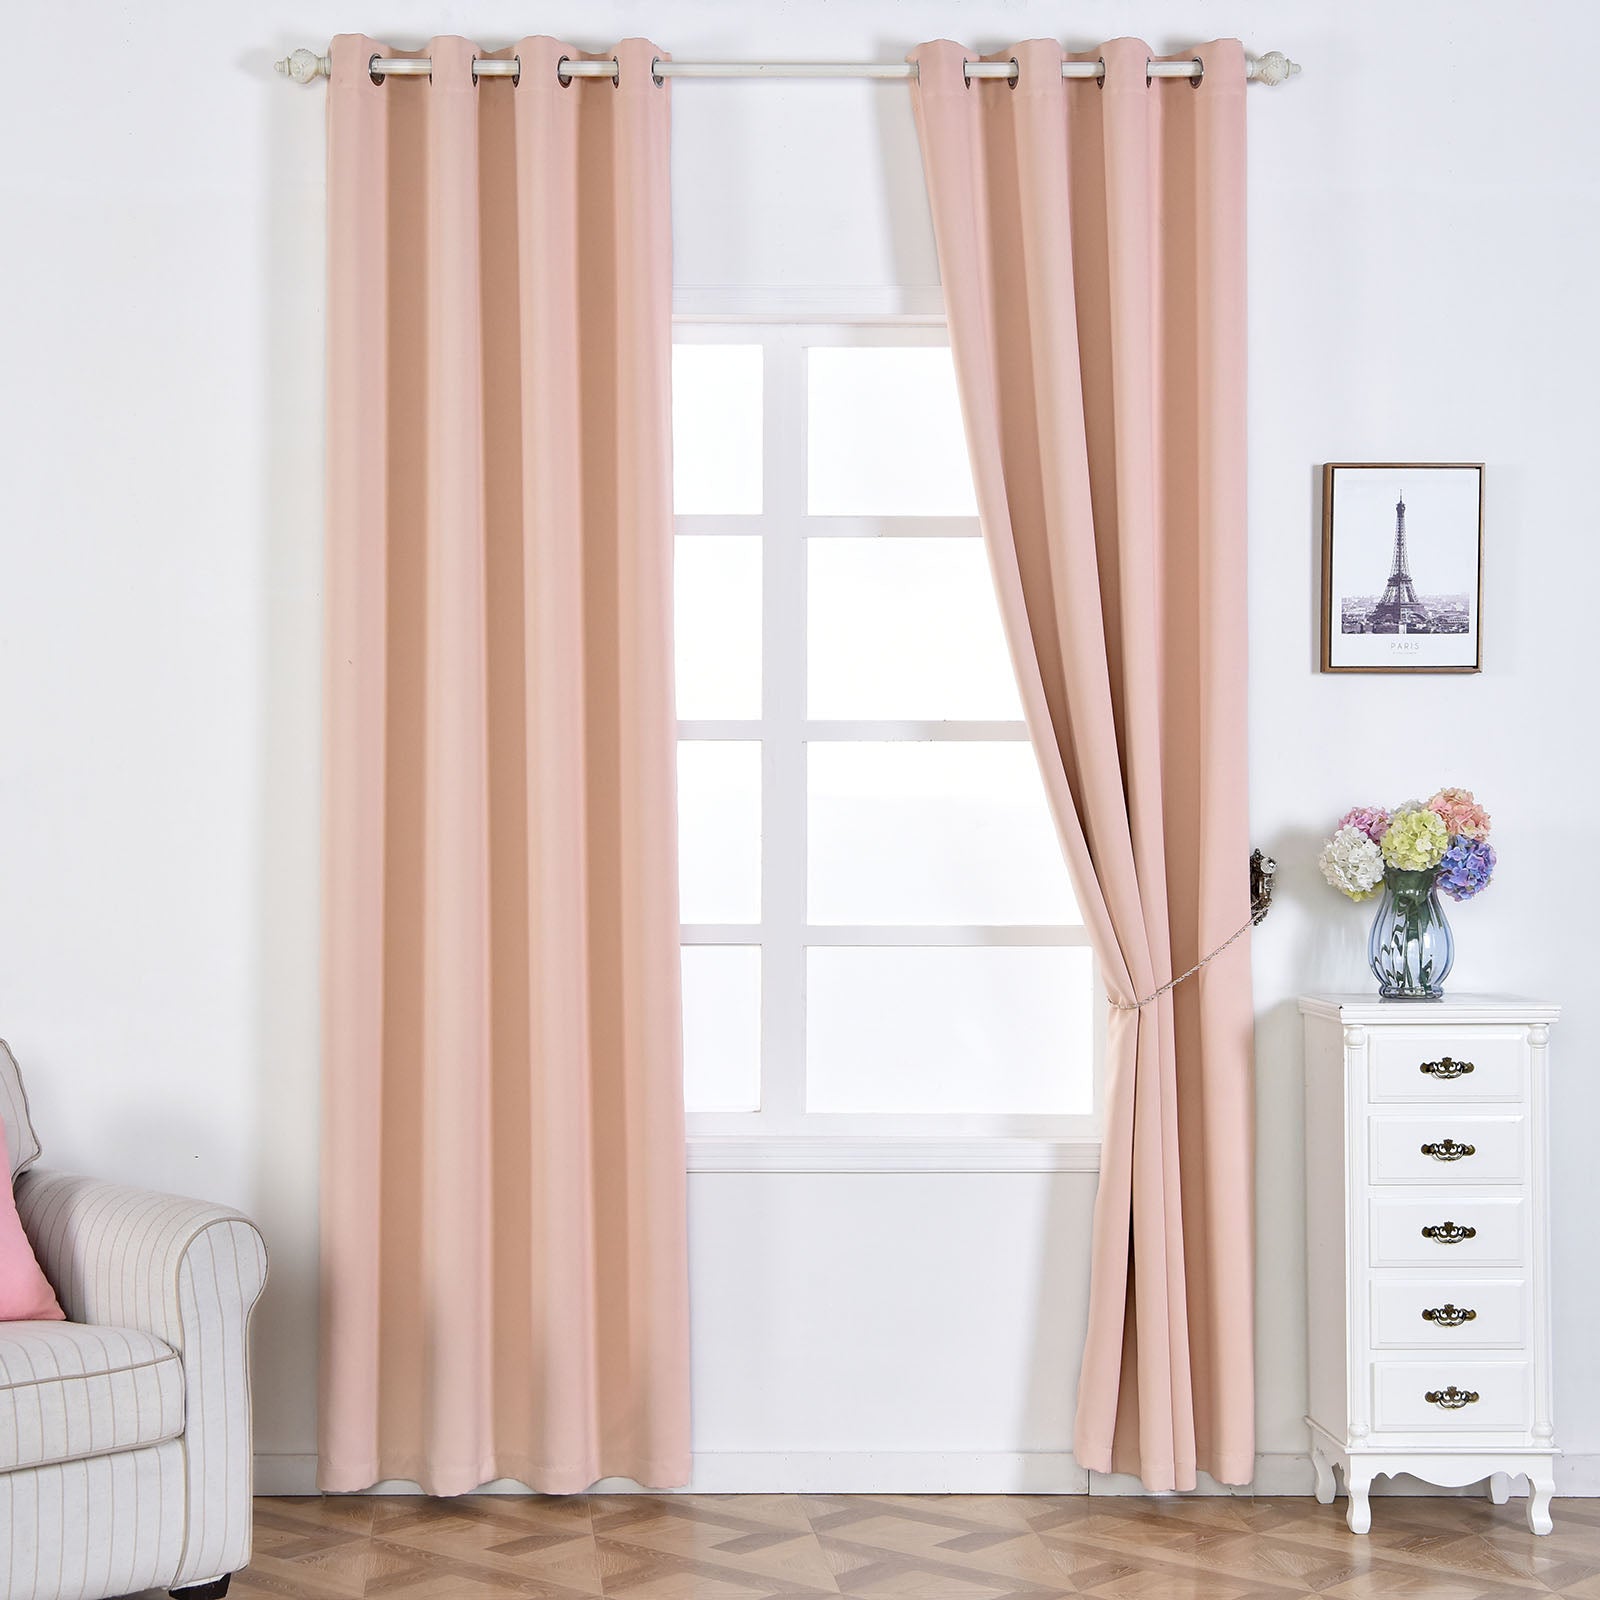 Blush Blackout Curtains | Pack of 2 | 52 x 108 Inch Blackout Curtains ...